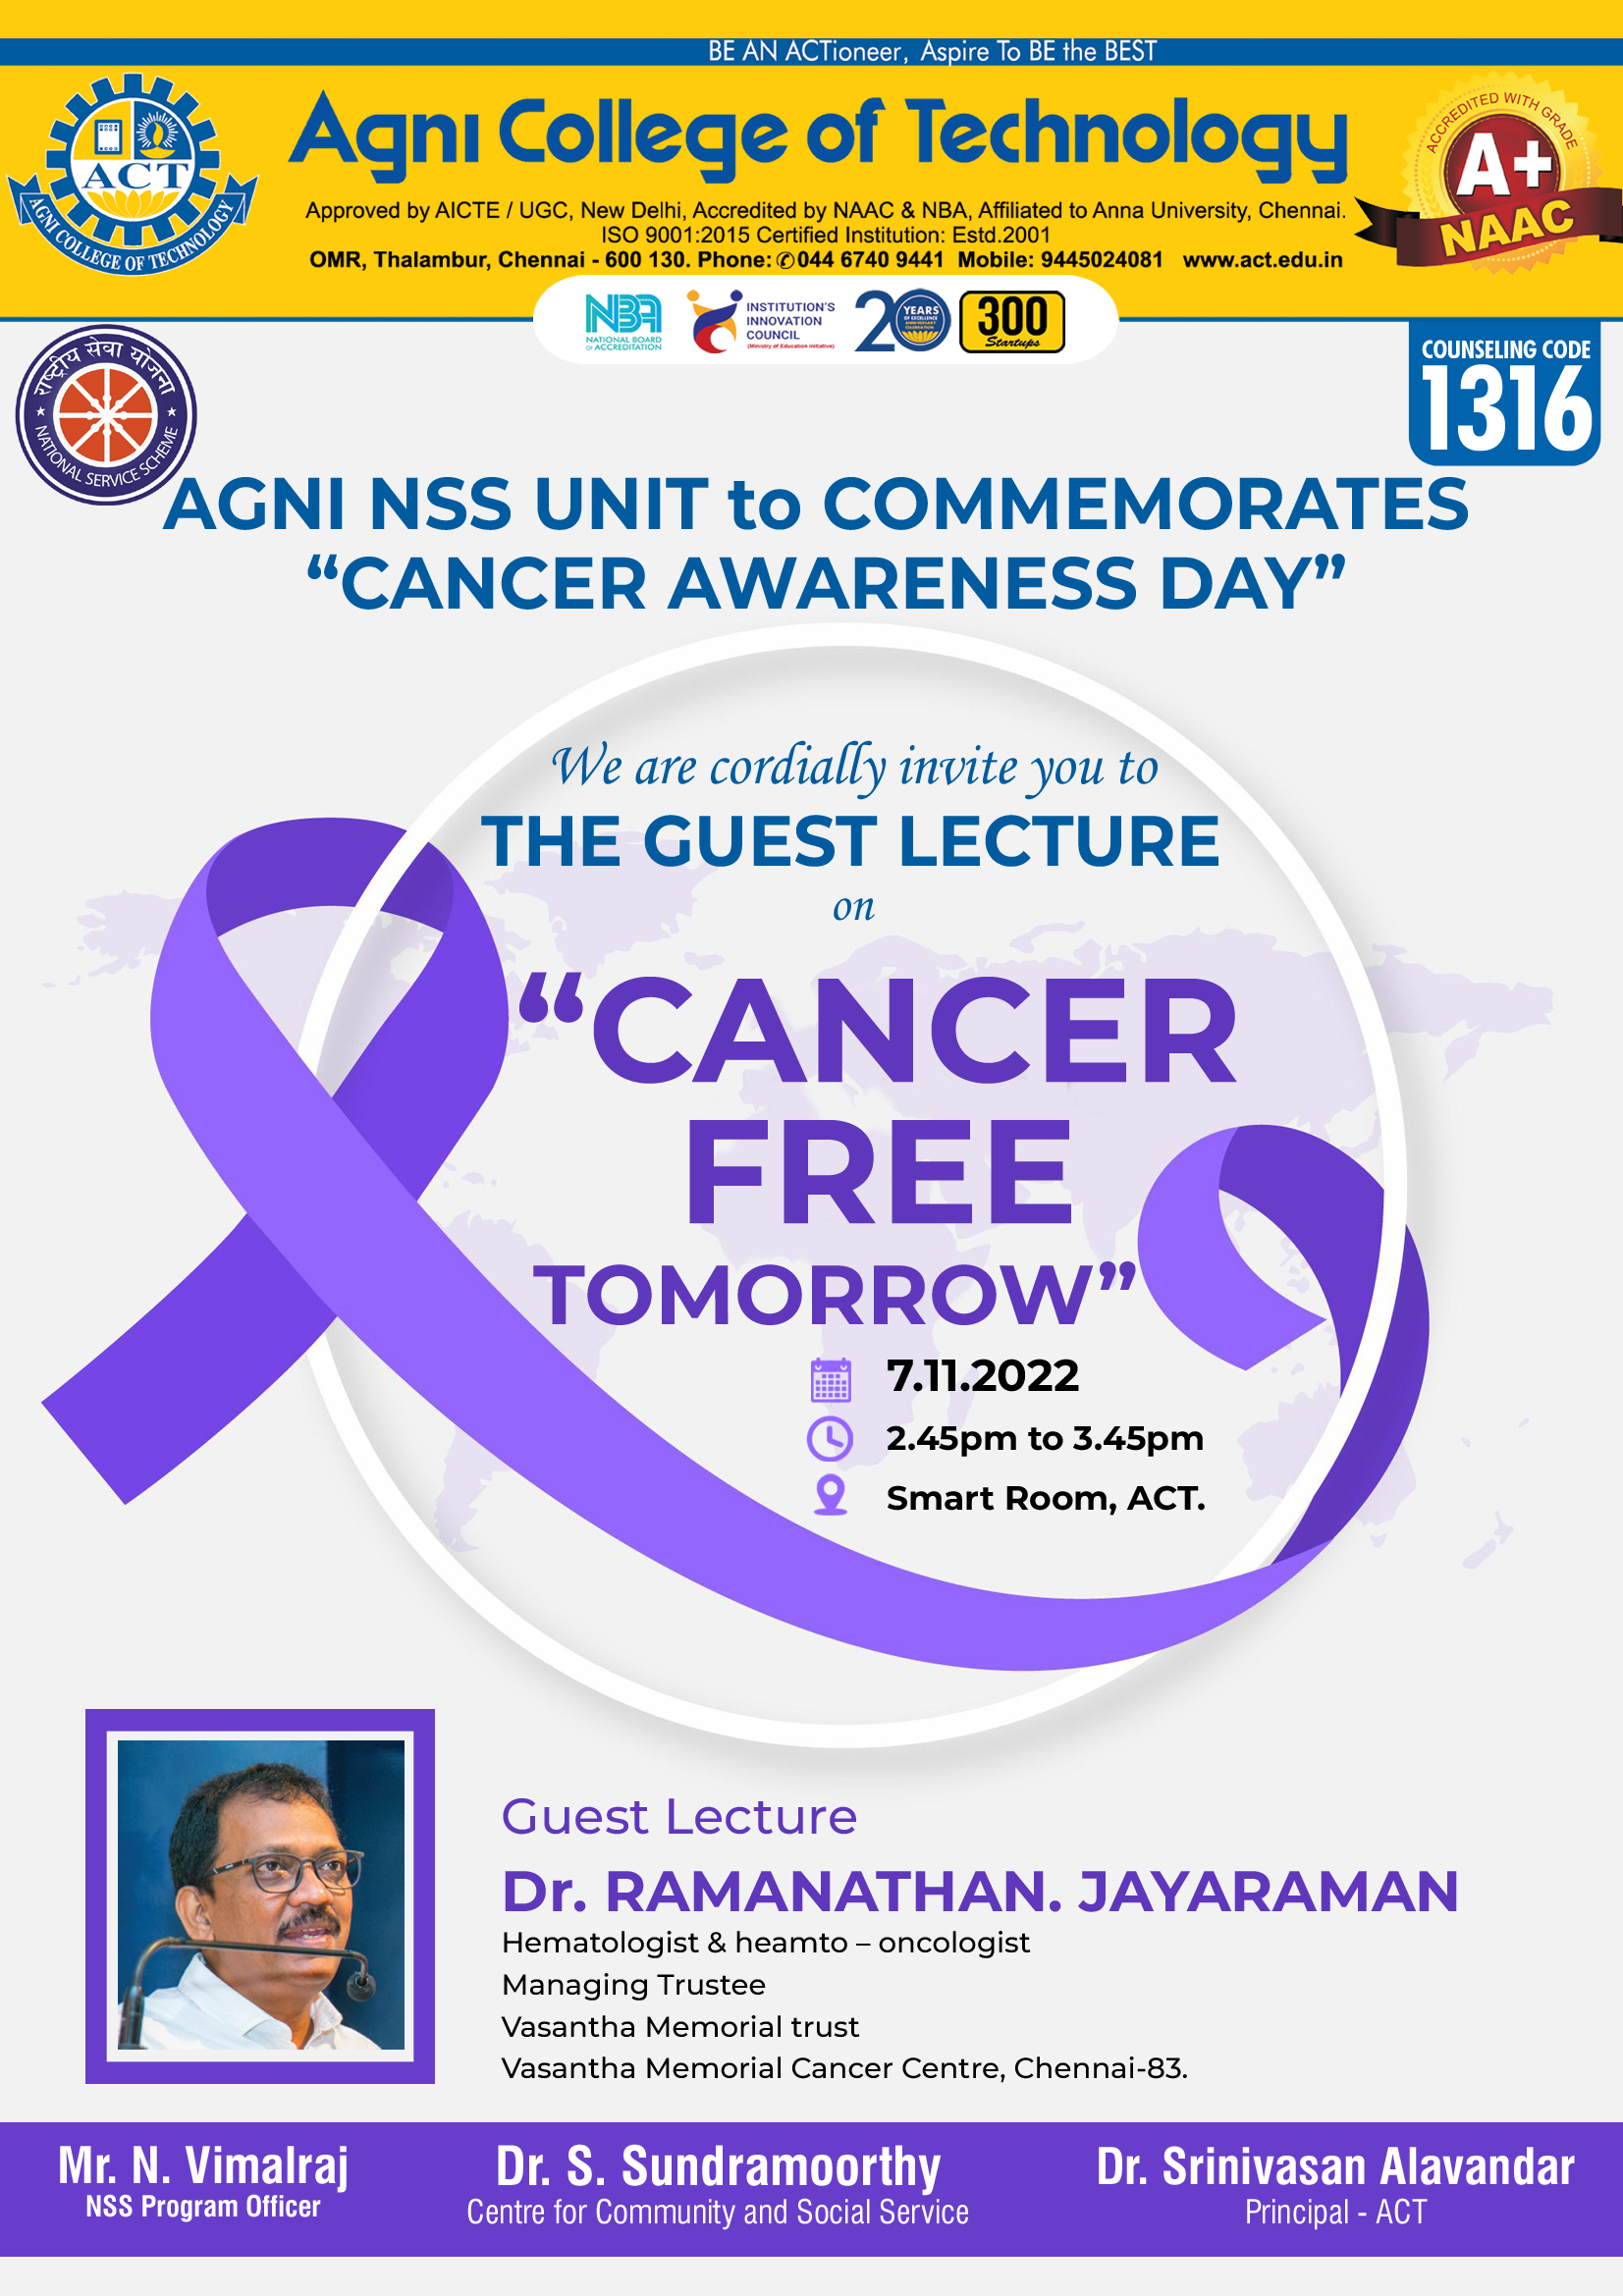 Guest Lecture on CANCER FREE TOMORROW